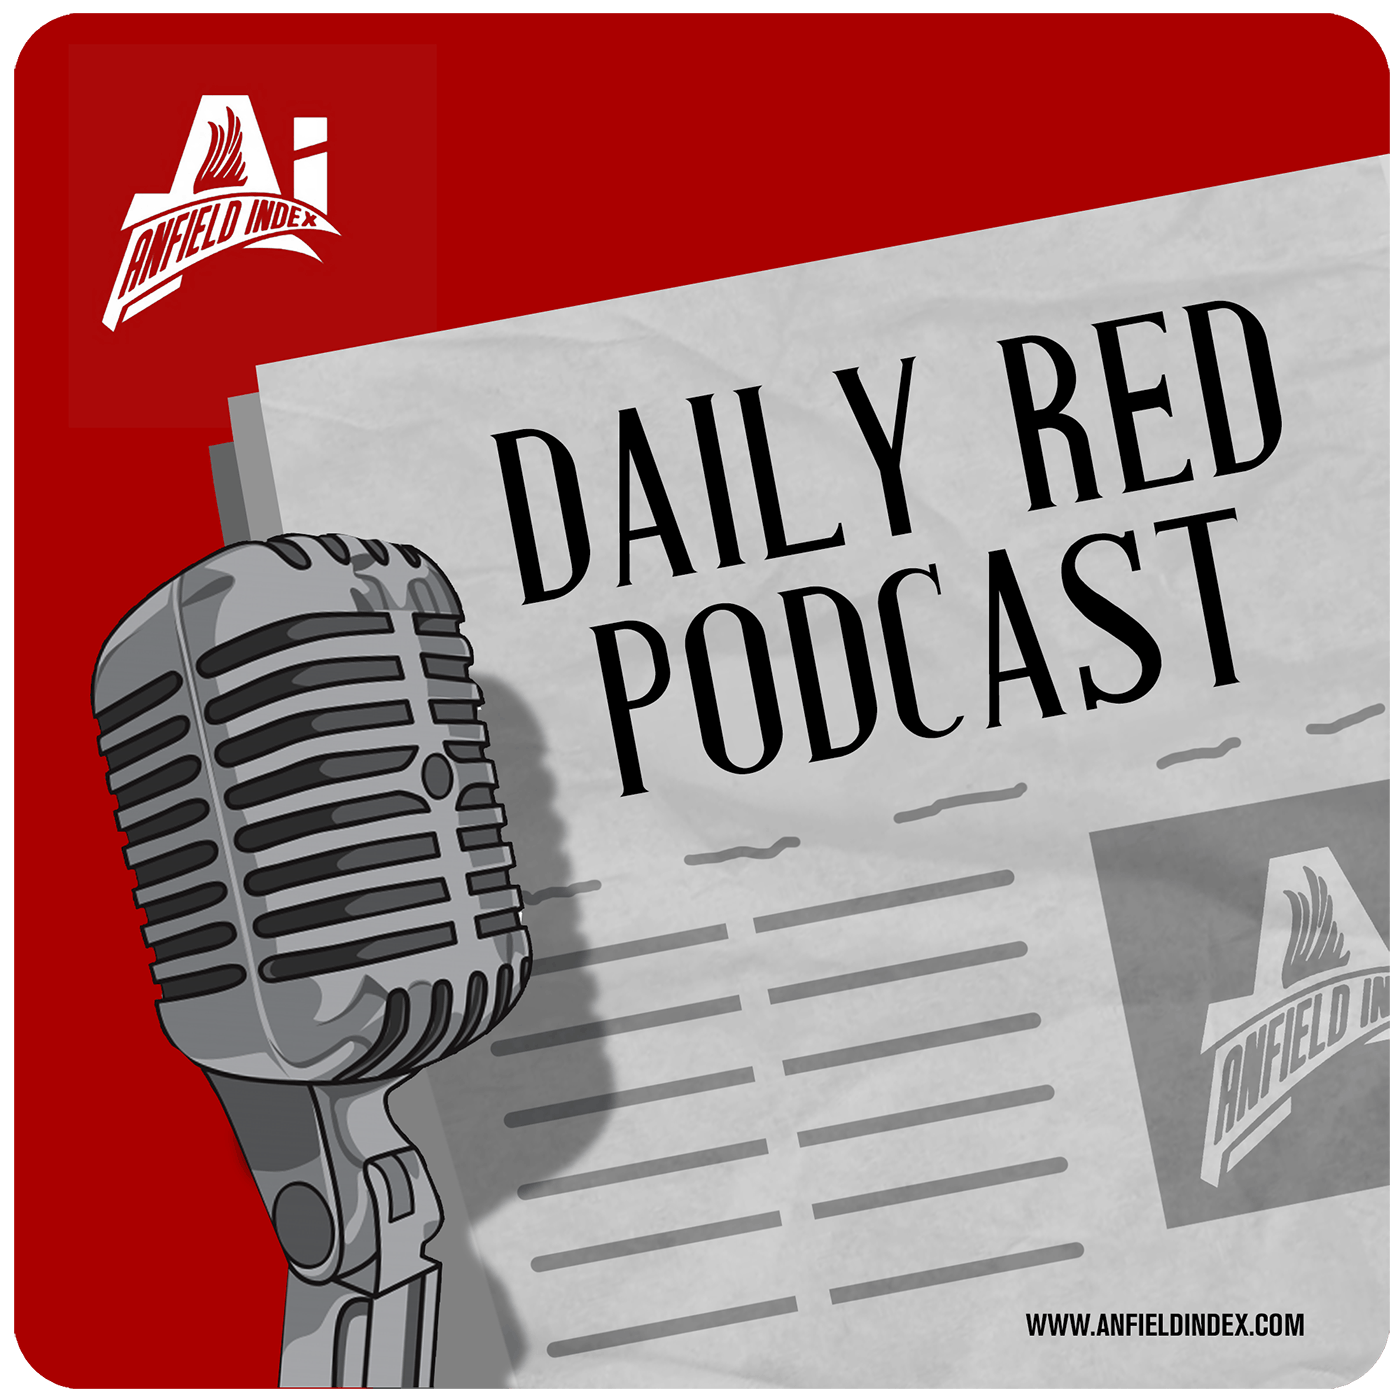 Edwards Return? - Daily Red Podcast